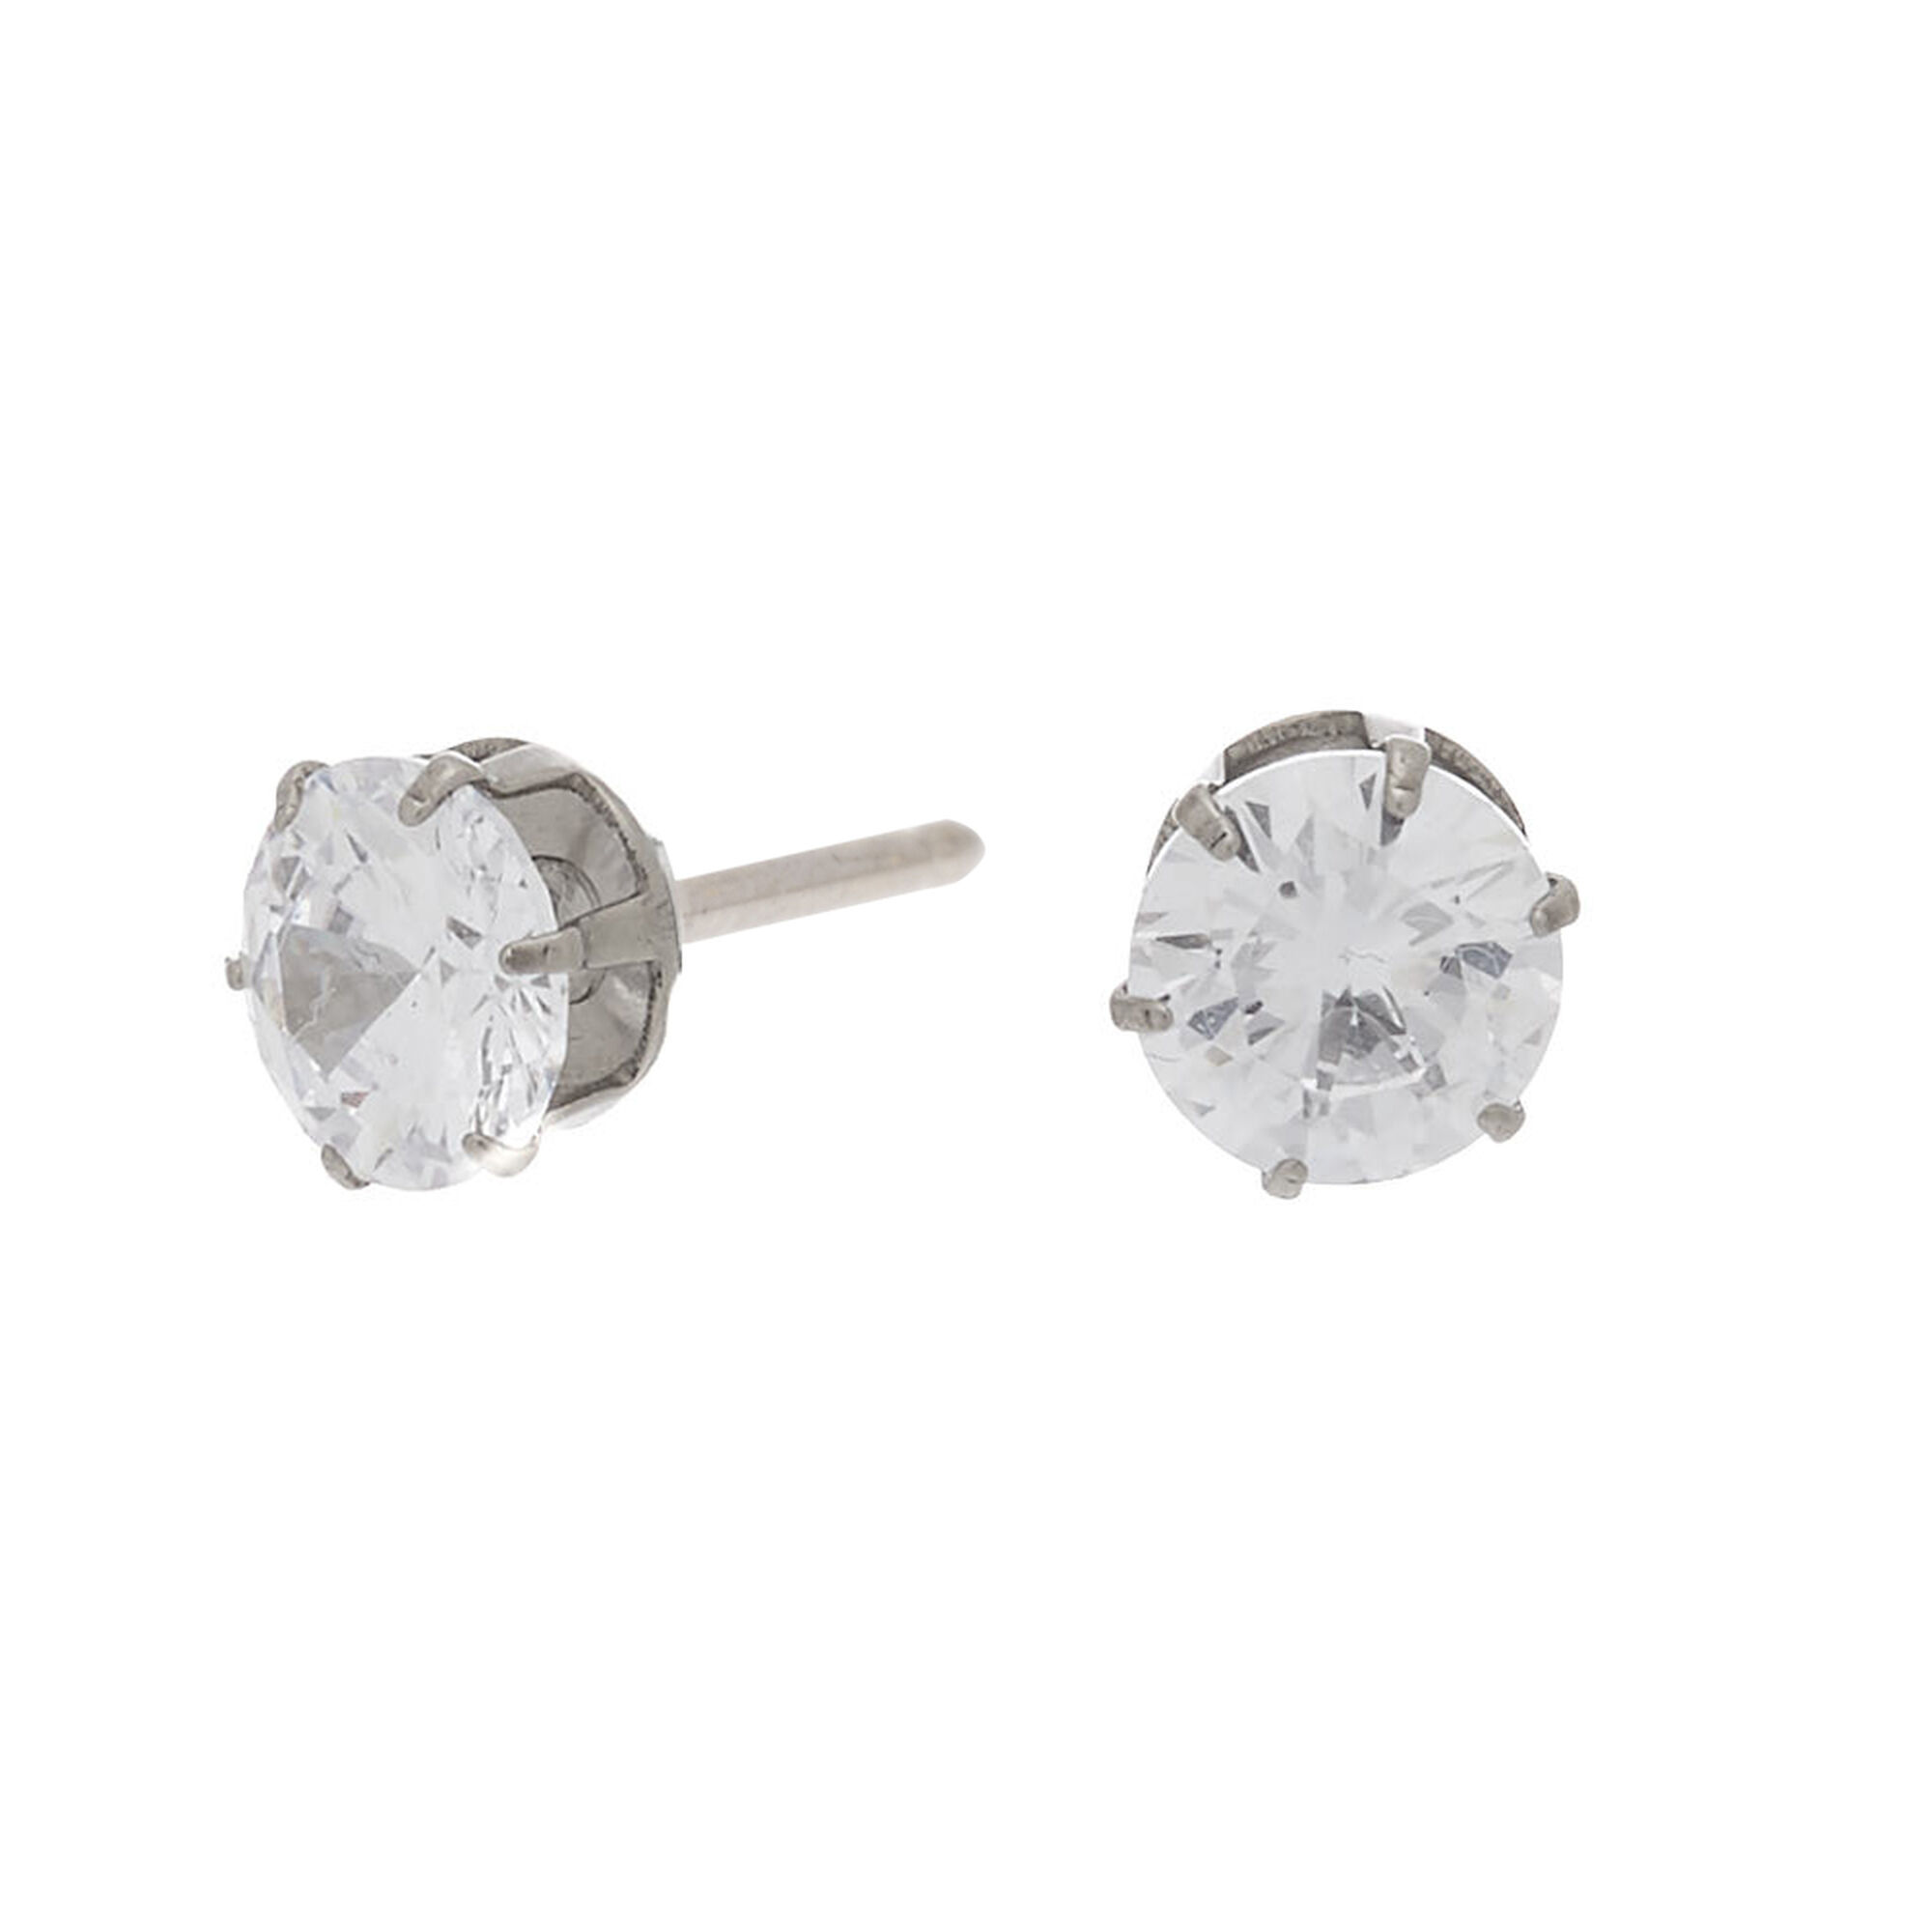 View Claires Titanium Cubic Zirconia Round Stud Earrings 6MM Silver information